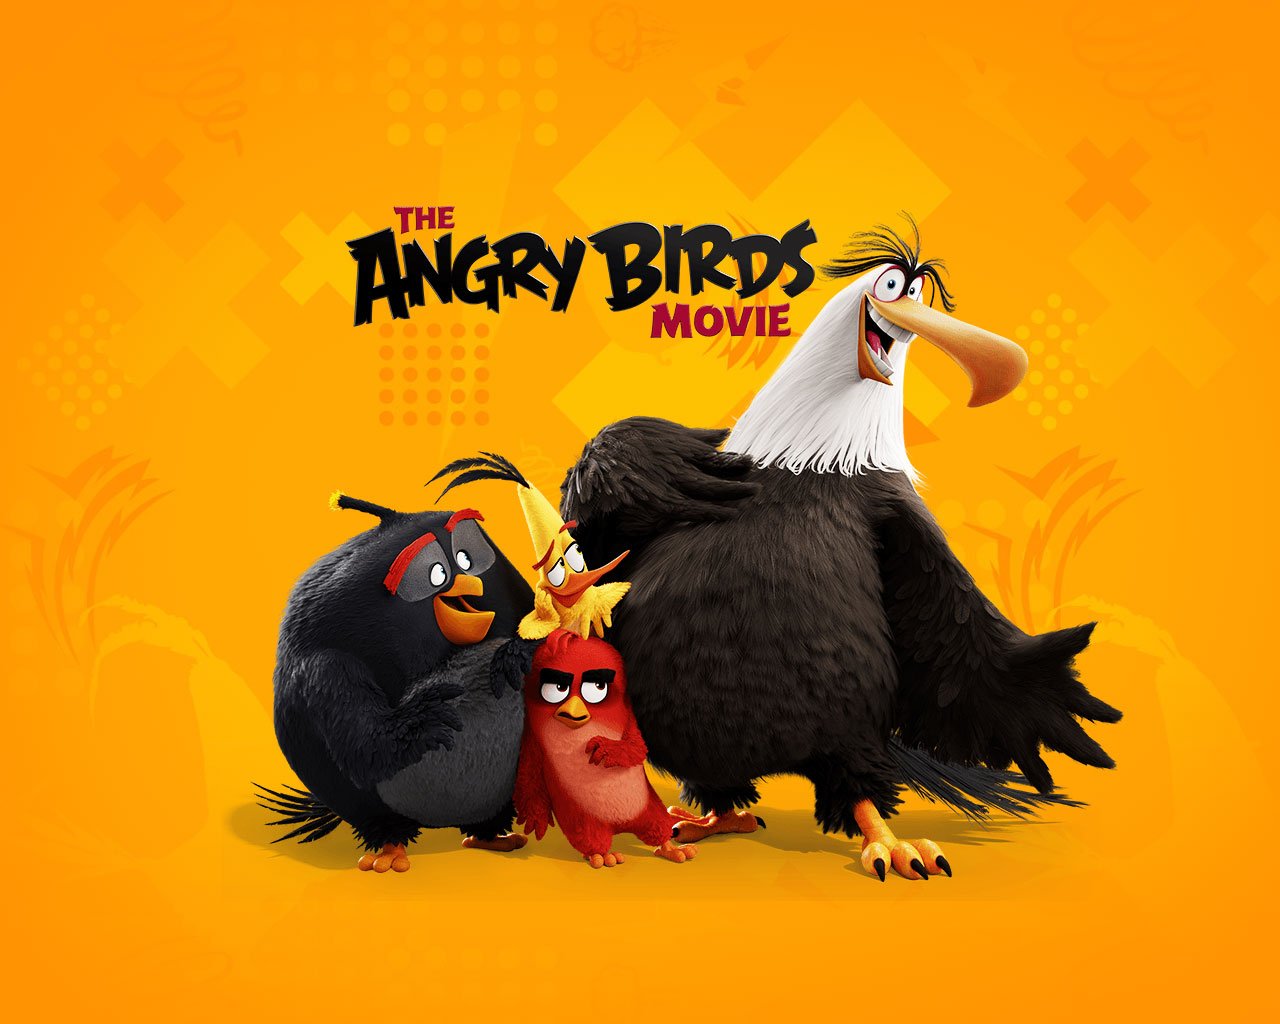 Download wallpapers Red, The Angry Birds Movie 2, red stone background, Red  characters, Red Angry Birds 2, Angry Birds characters for desktop free.  Pictures for desktop free